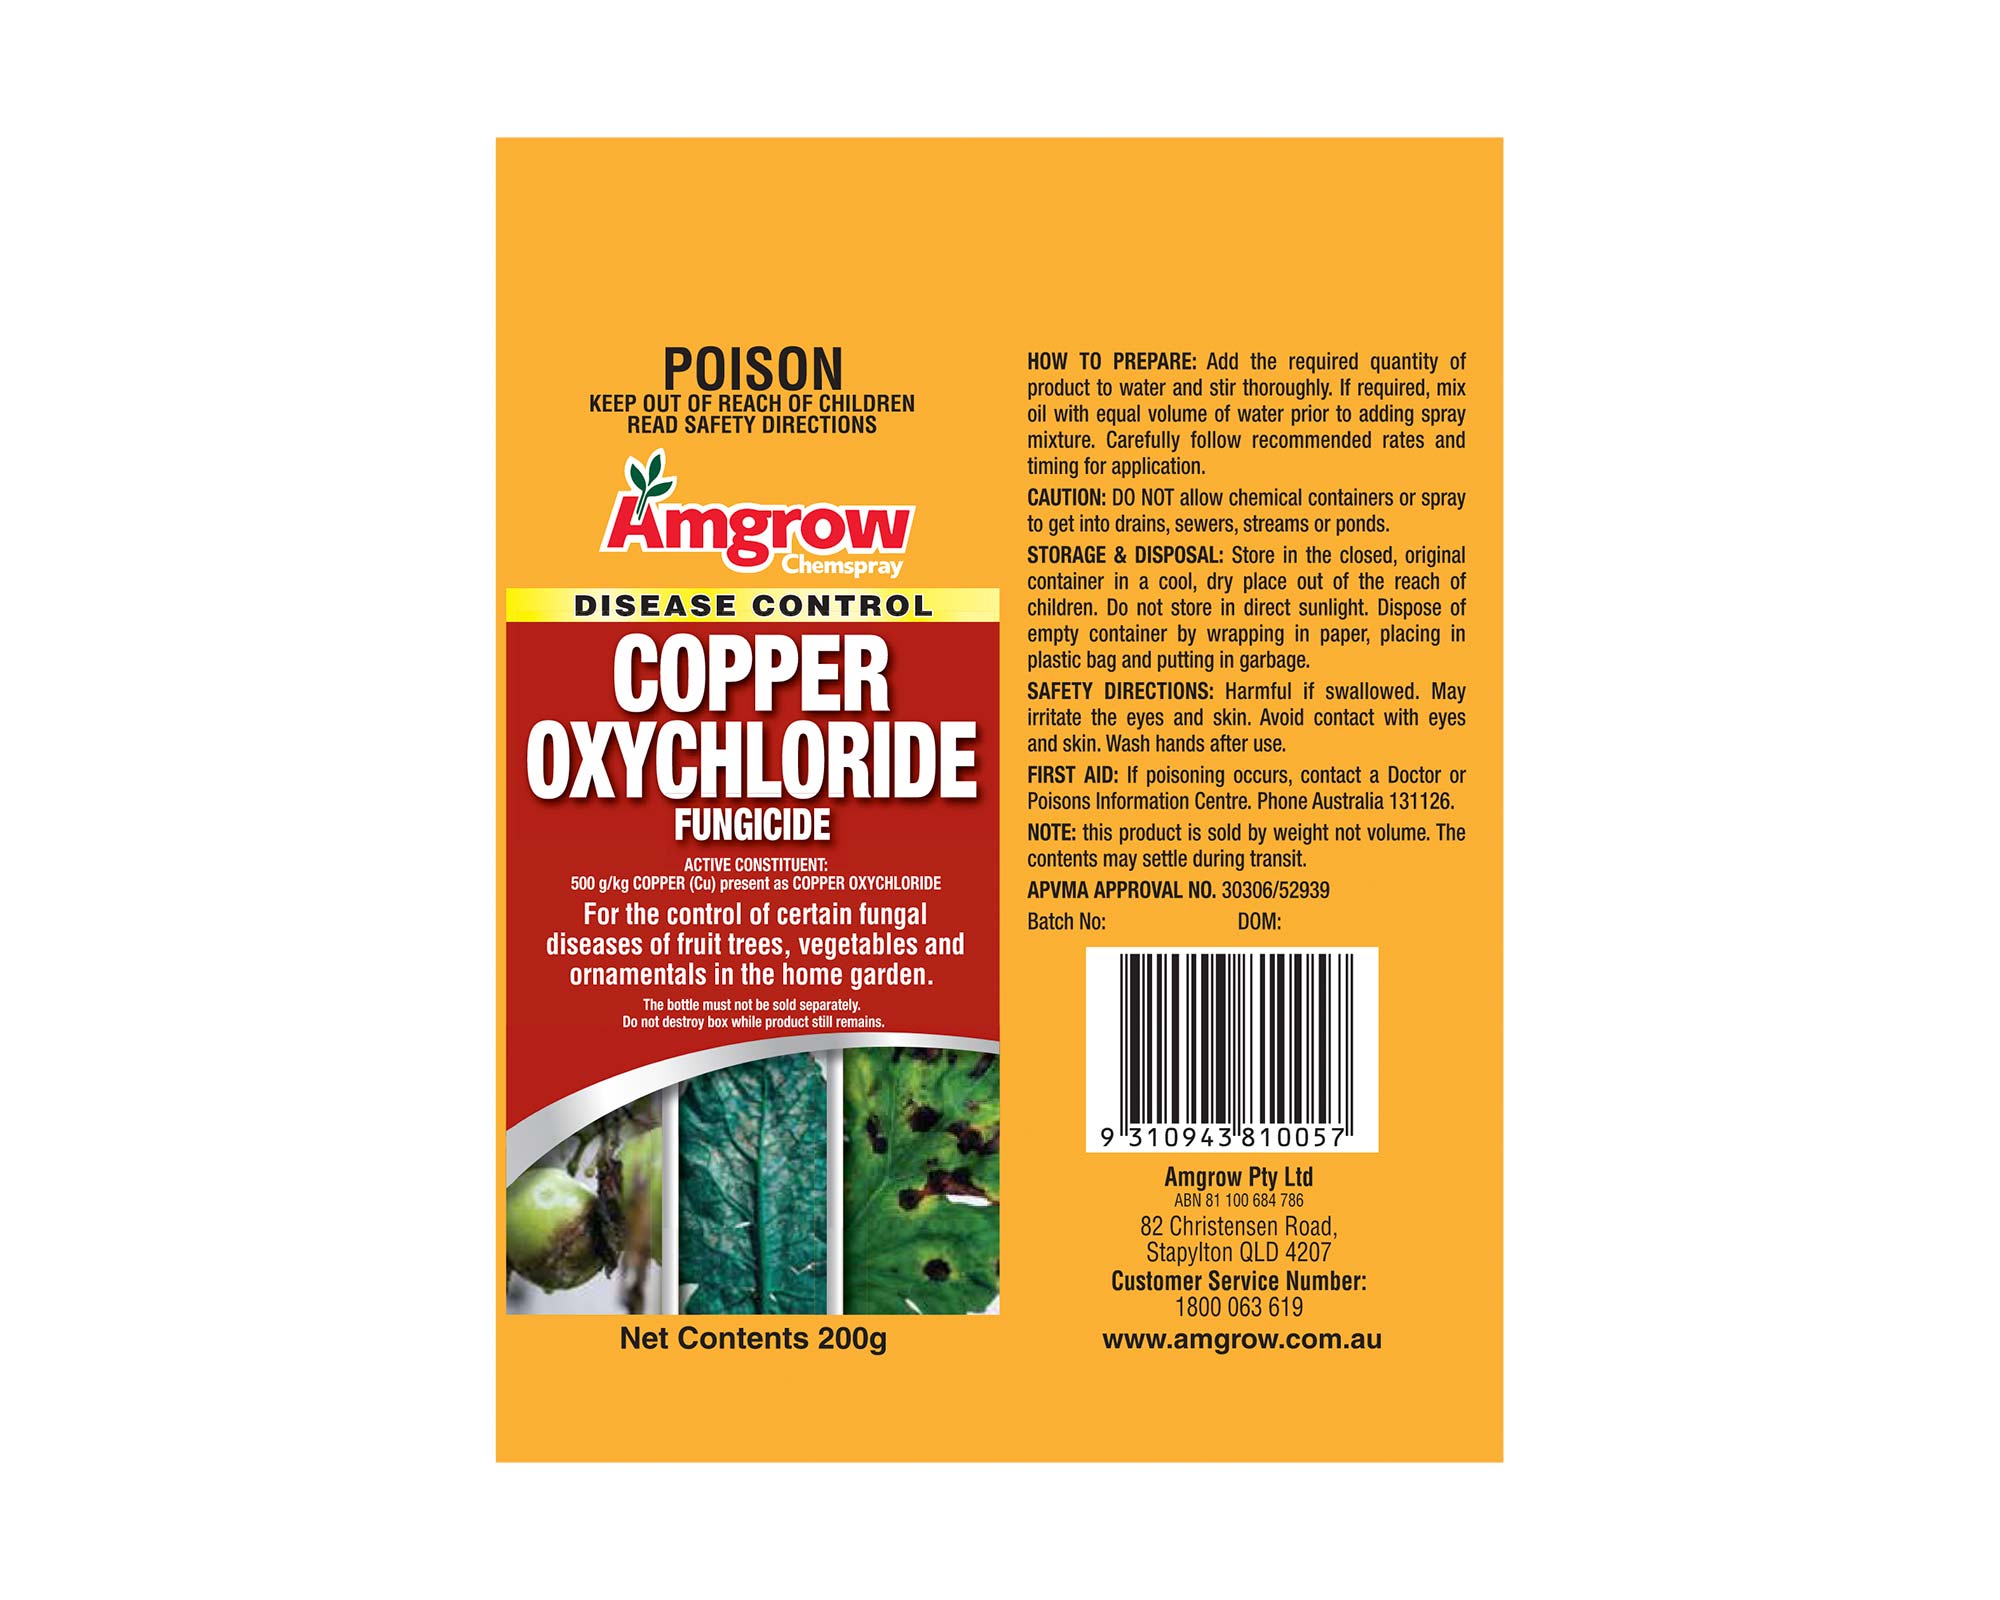 Copper Oxychloride Fungicide Amgrow - label